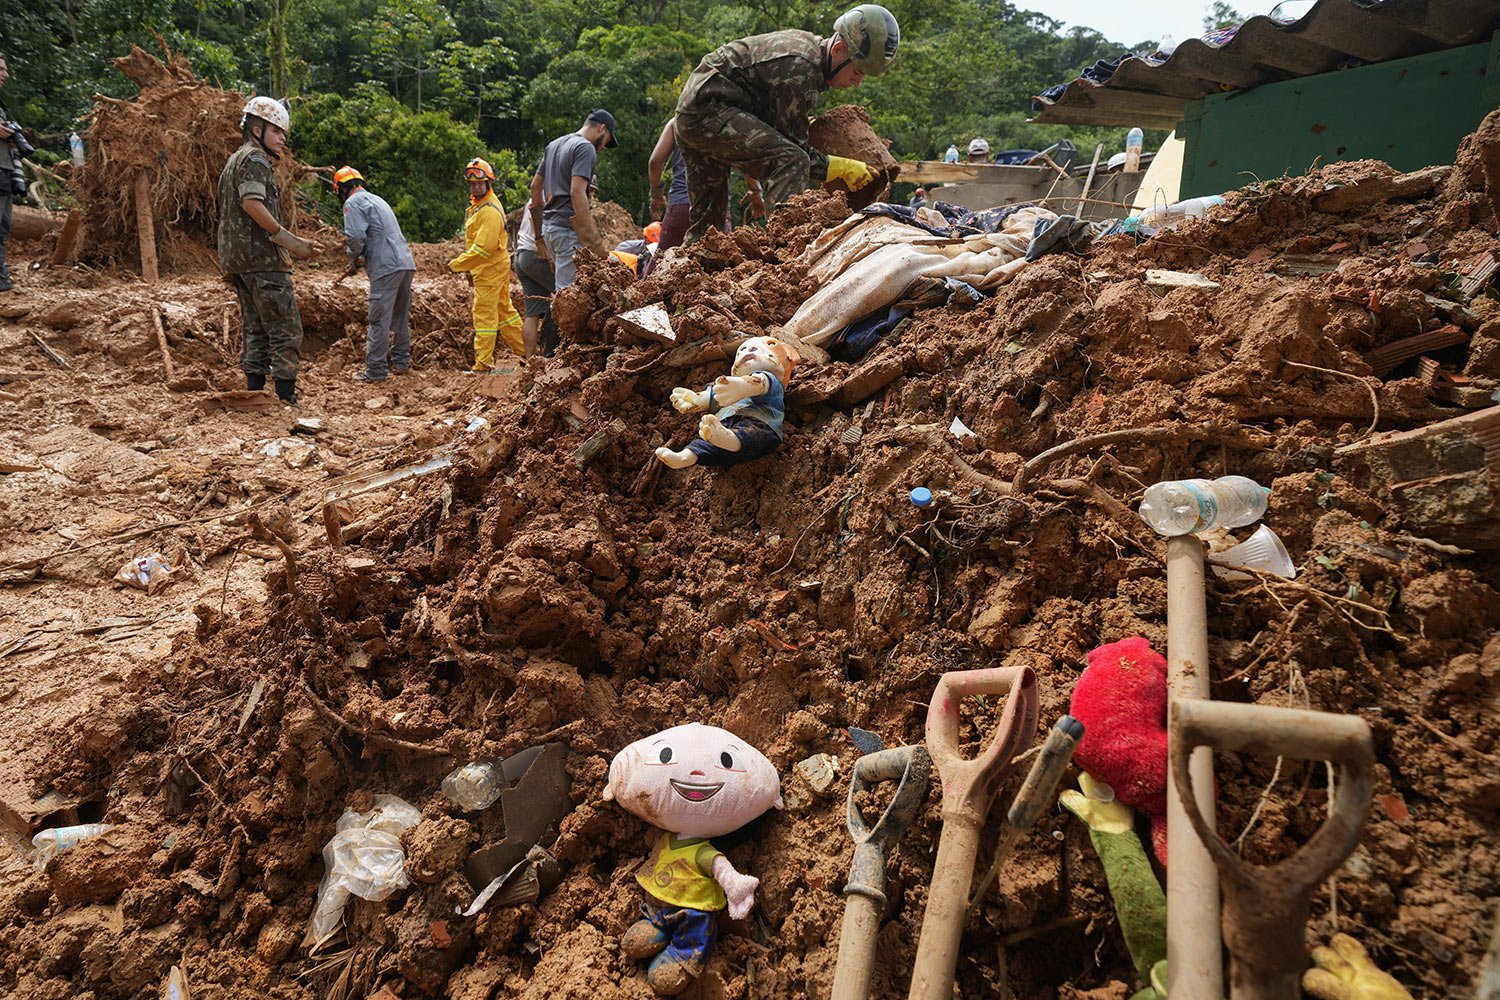  Children's toys lay in the mud where rescue workers look for bodies after a landslide was triggered by heavy rain near Barra do Sahy beach in the coastal city of Sao Sebastiao, Brazil, Wednesday, Feb. 22, 2023. (AP Photo/Andre Penner) 